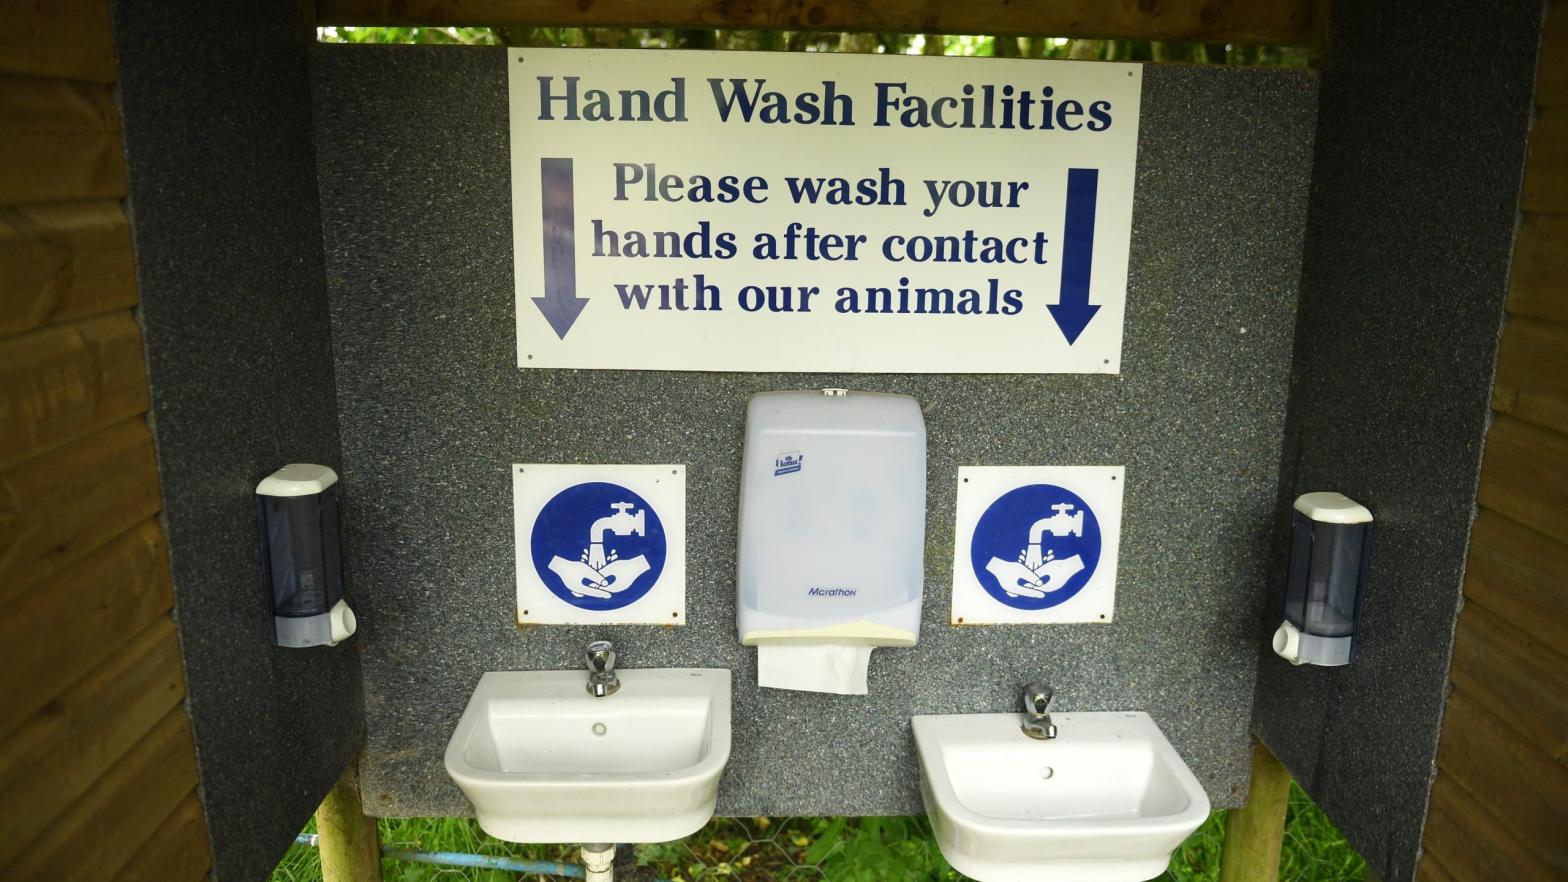 A handwashing station at the Exmoor Zoo in Barnstaple, England, in a photo taken June 11, 2020 (Photo: Harry Trump, Getty Images)